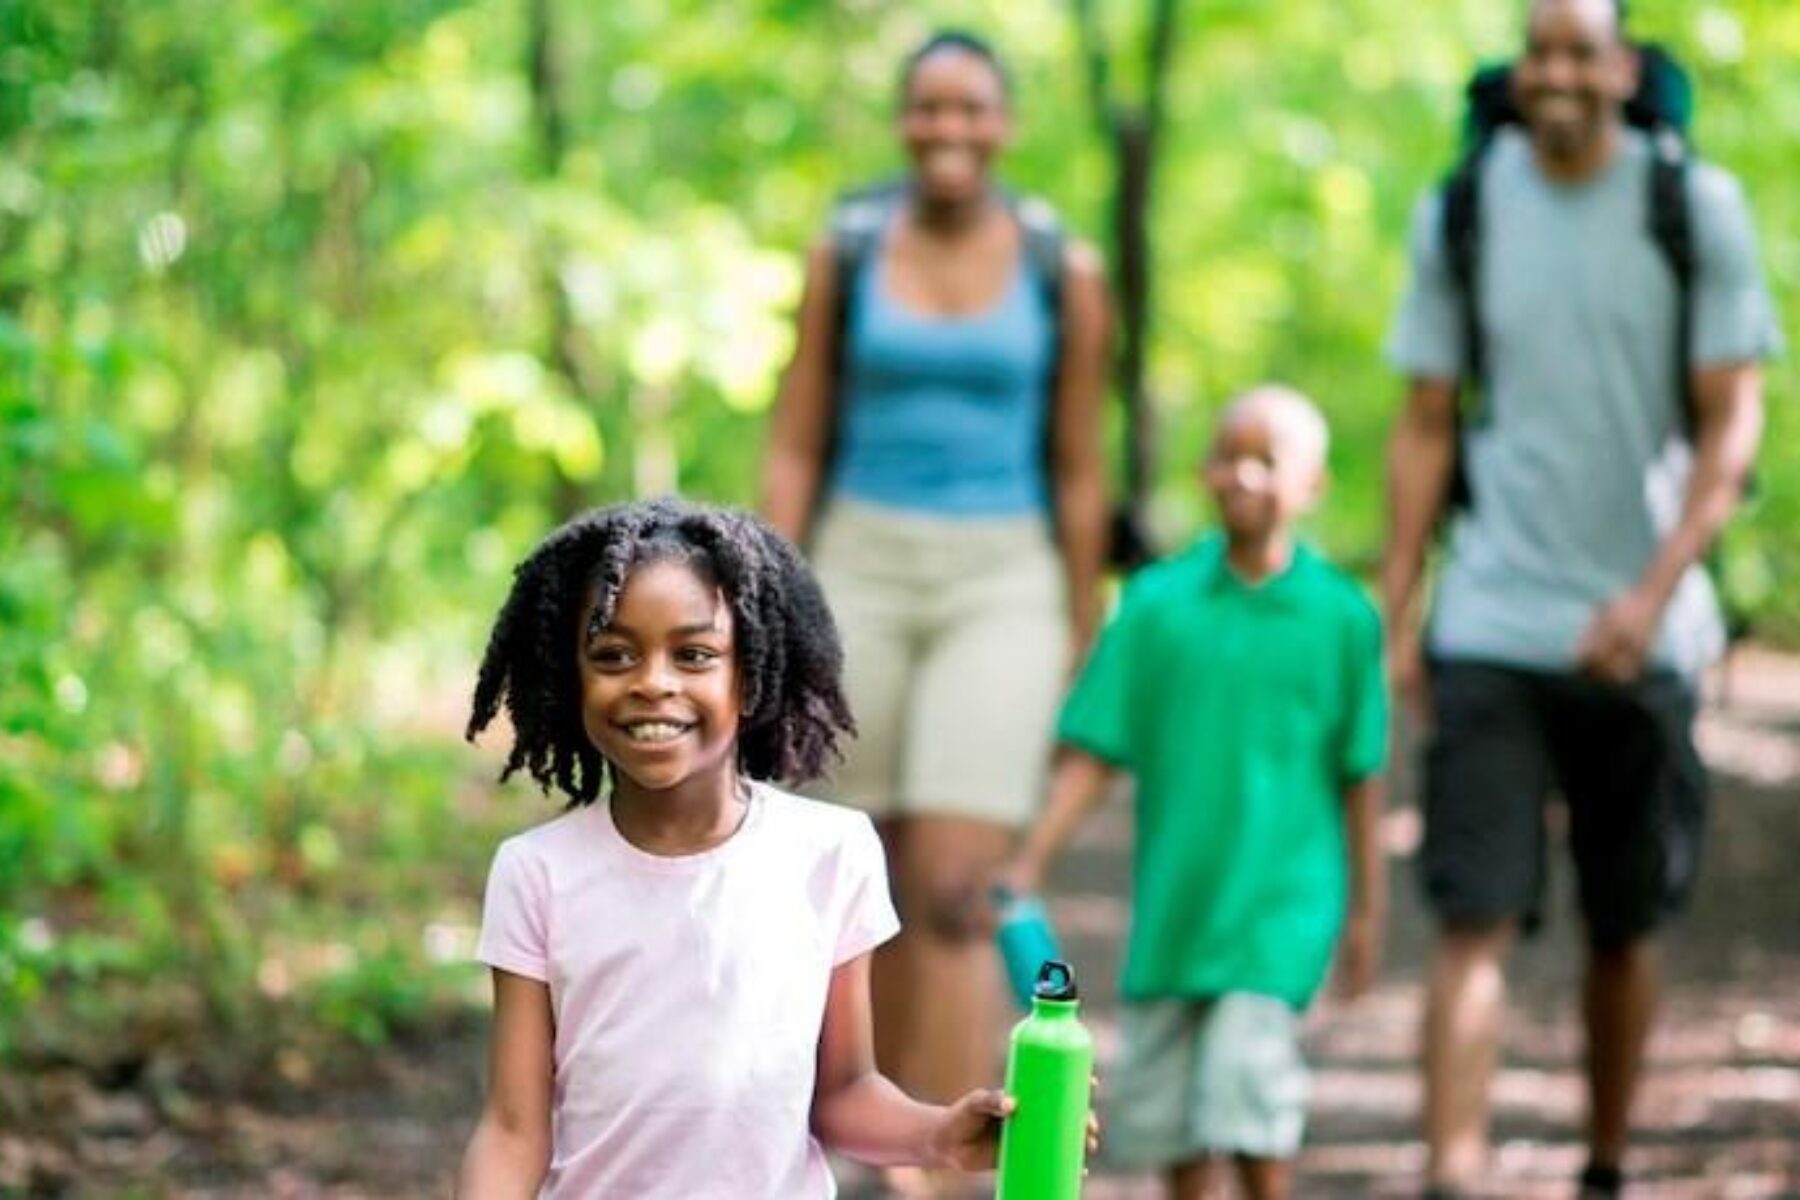 A family of four are hiking through the woods on a beautiful sunny spring day. The are walking on a footpath and there are green trees all around them. (A family of four are hiking through the woods on a beautiful sunny spring day. The are walking on